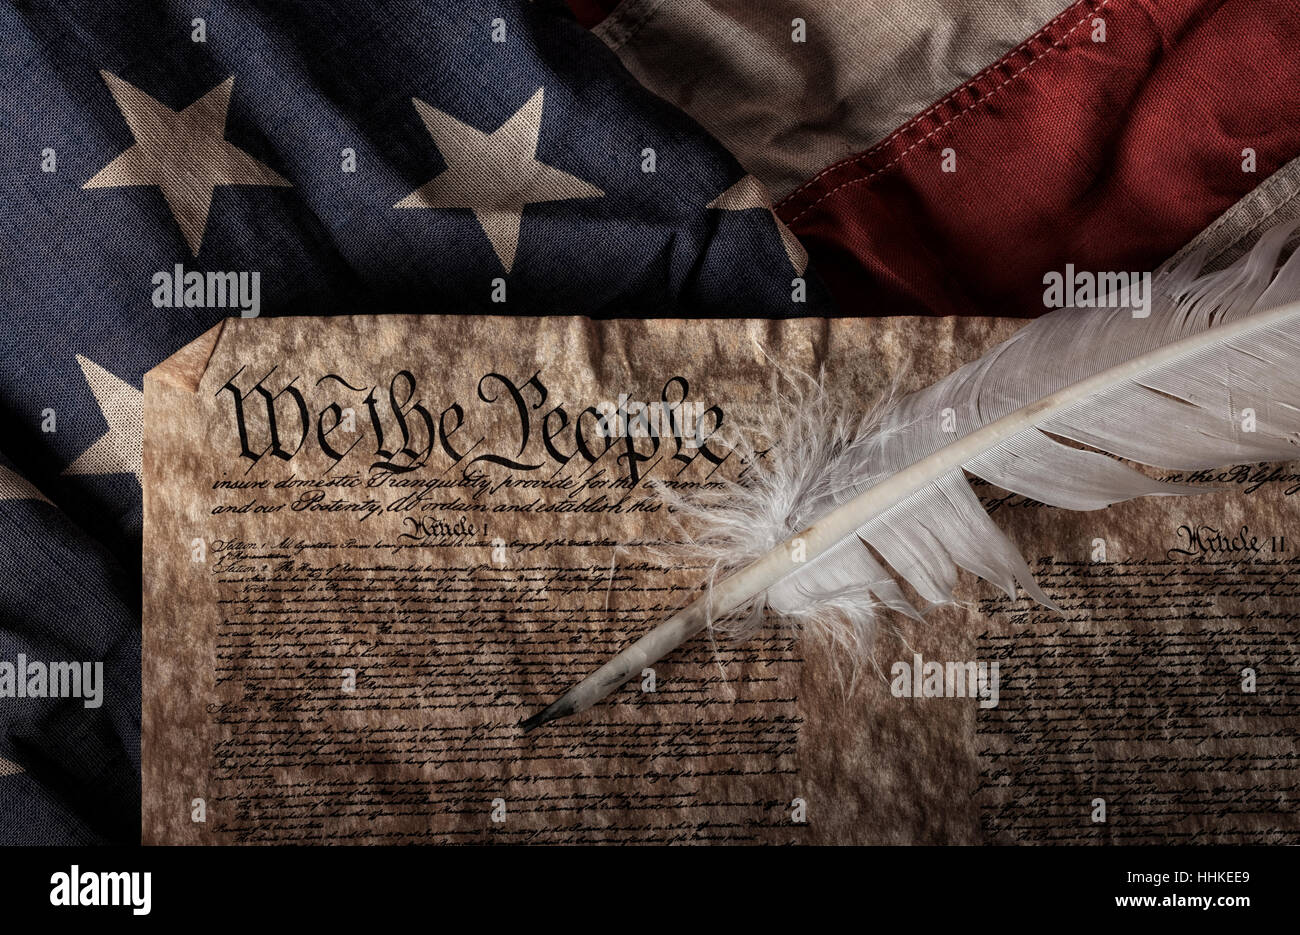 U.S. constitution on an old and worn flag Stock Photo